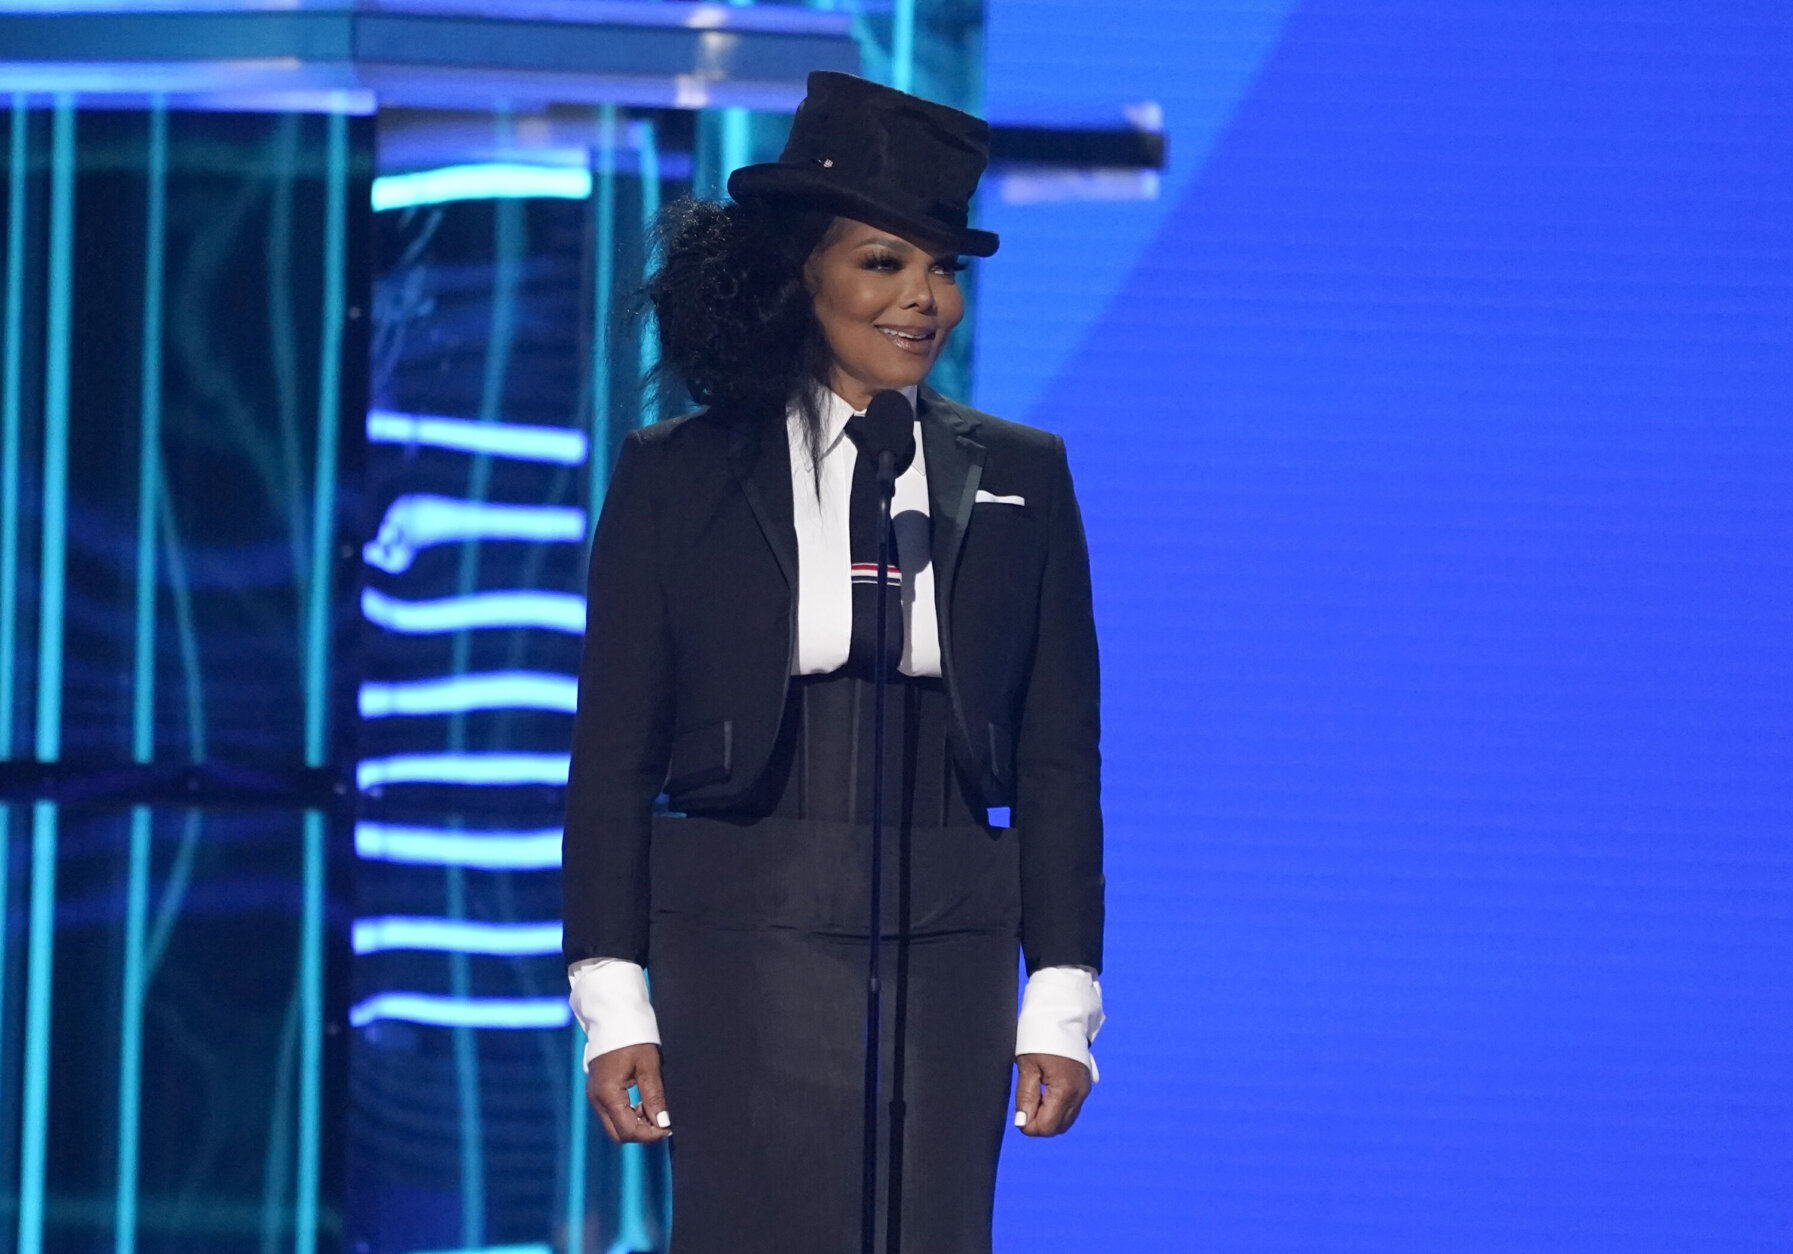 Janet Jackson introduces the Icon Award at the Billboard Music Awards on Sunday, May 15, 2022, at the MGM Grand Garden Arena in Las Vegas. (AP Photo/Chris Pizzello)